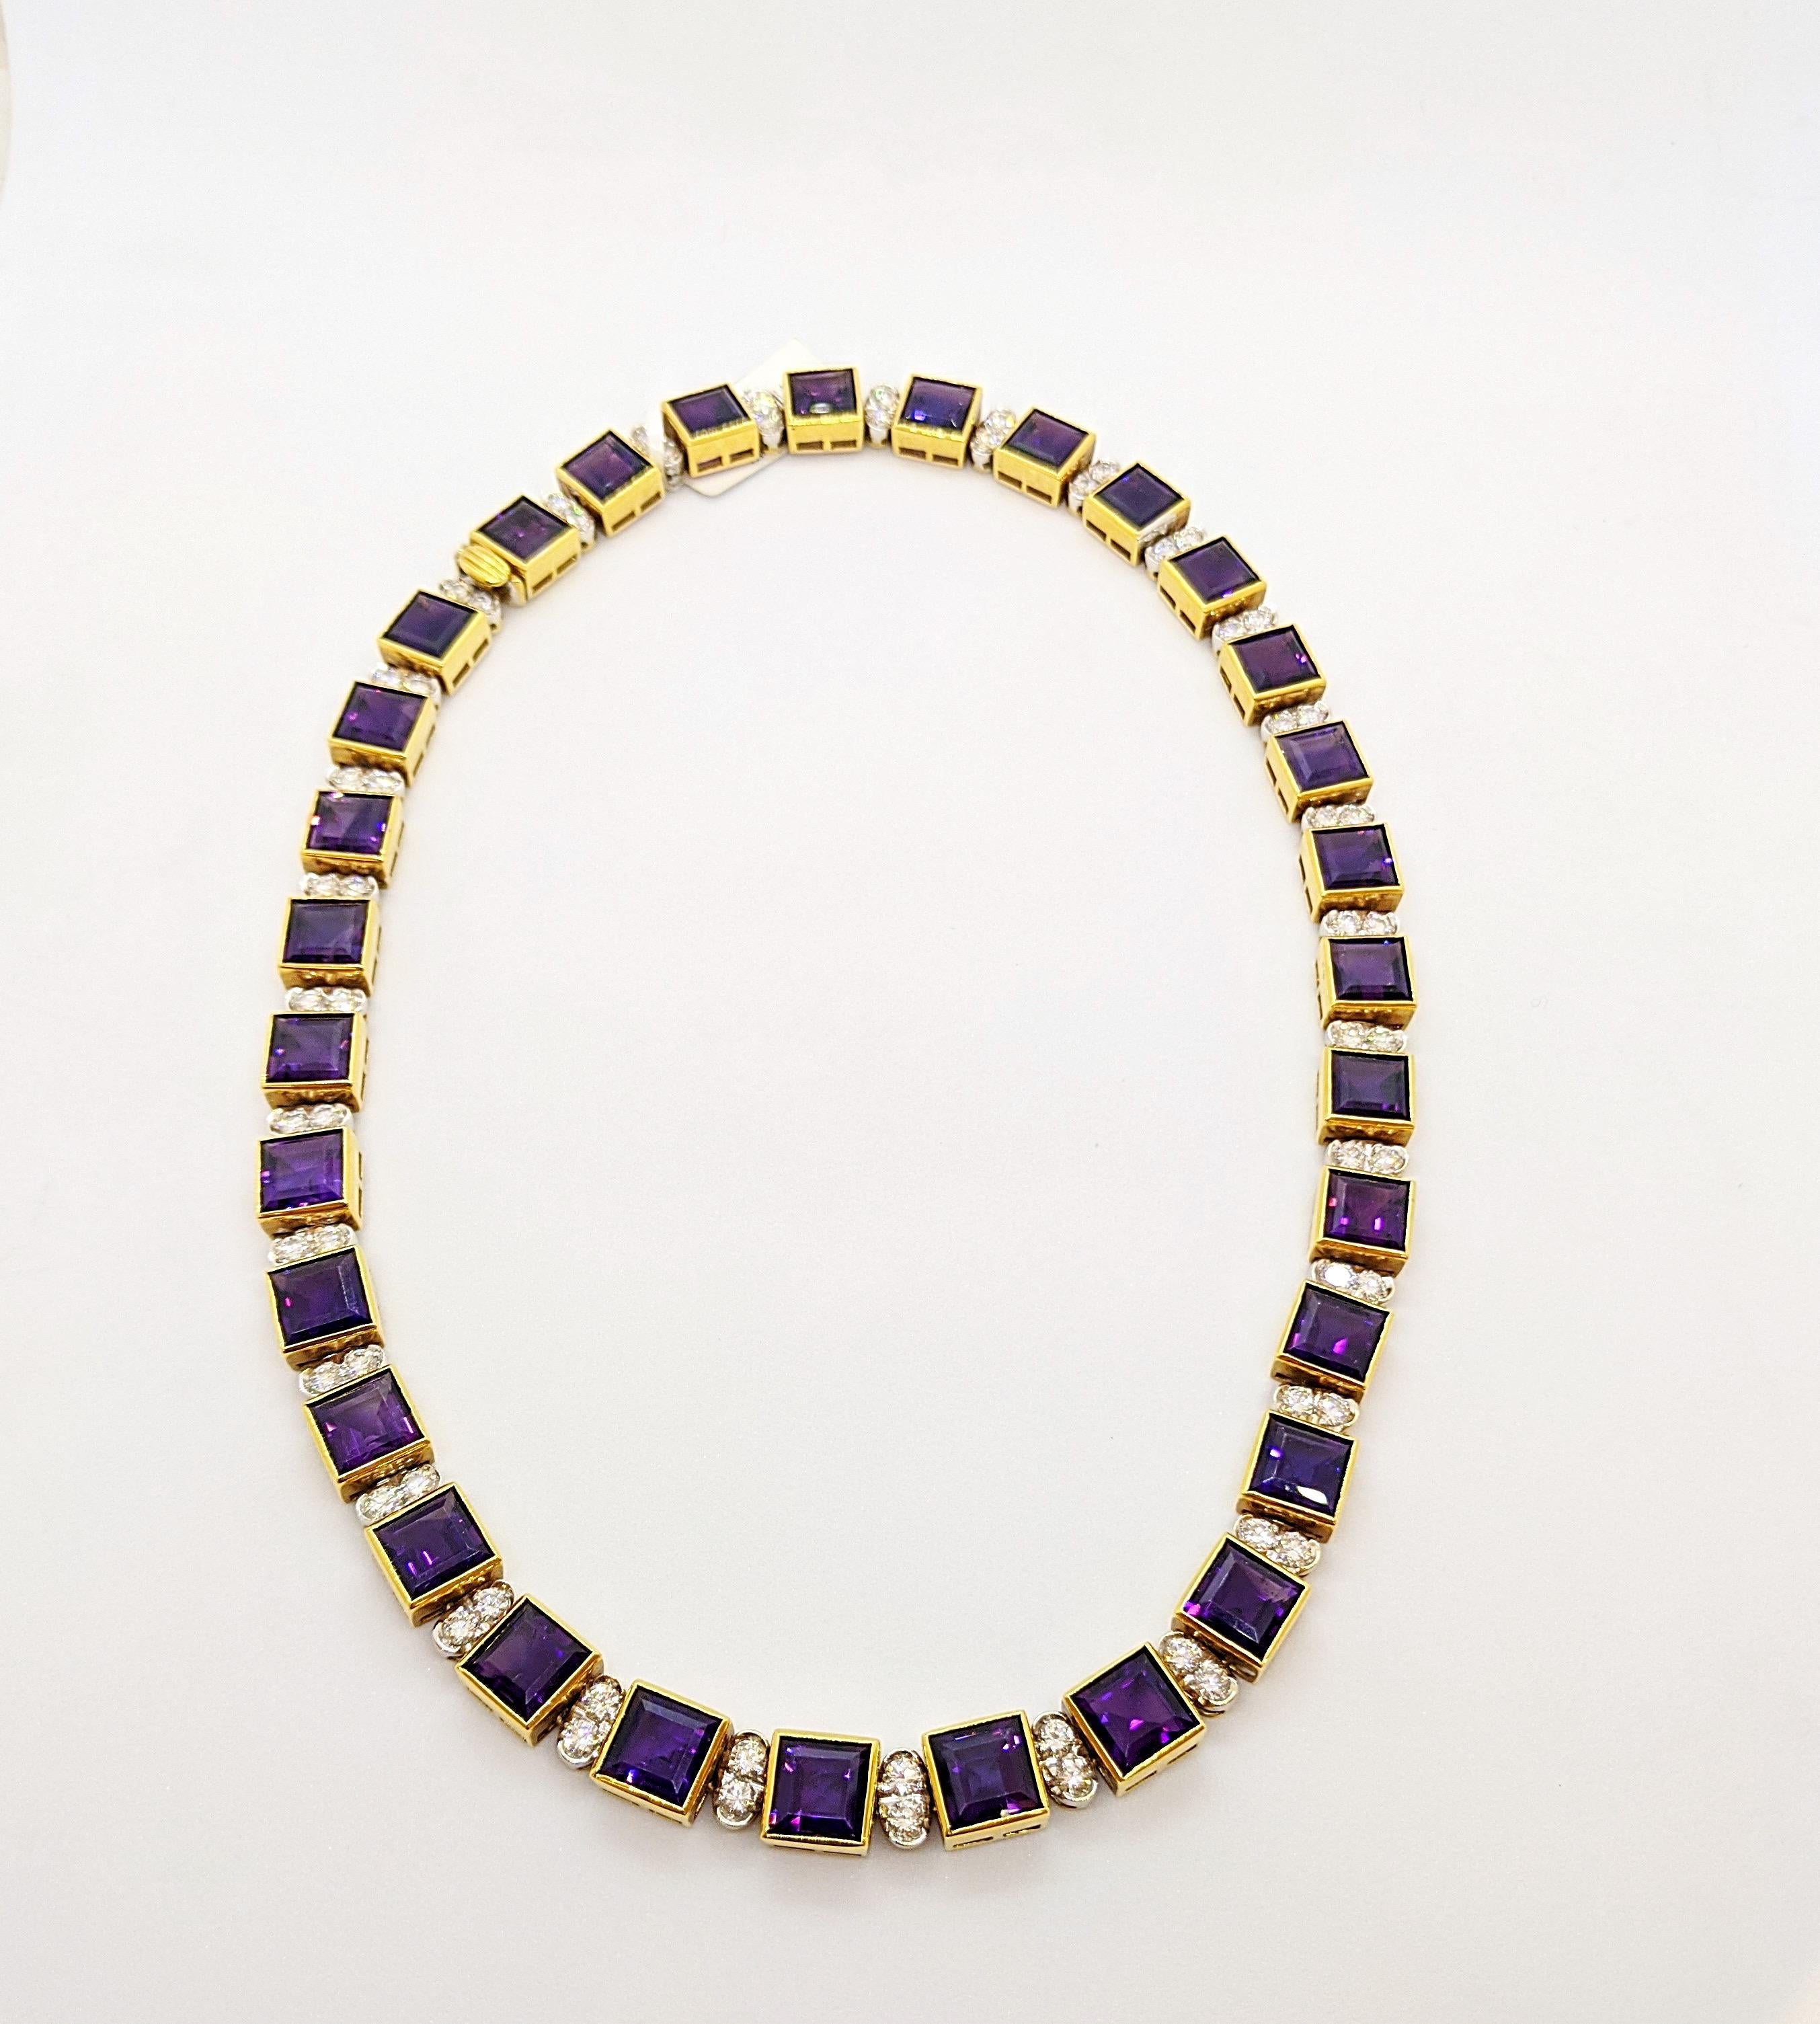 Contemporary 18KT Yellow Gold 61.19CT. Amethyst & 5.51Ct. Diamond Art Deco Inspired Necklace For Sale